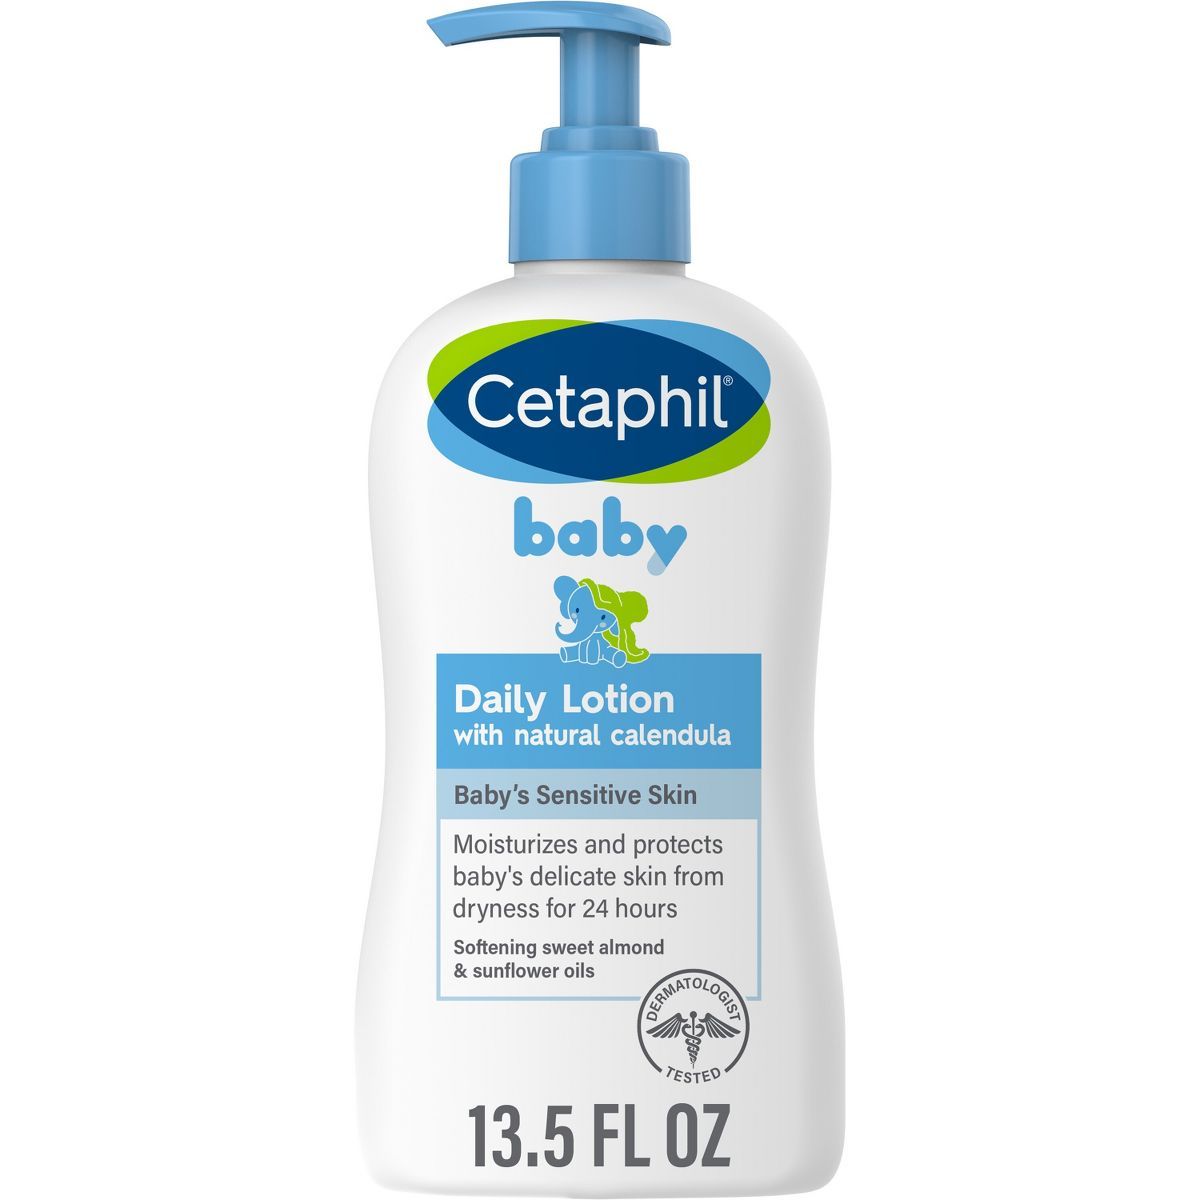 Cetaphil Baby Daily Lotion - 13.5 fl oz | Target